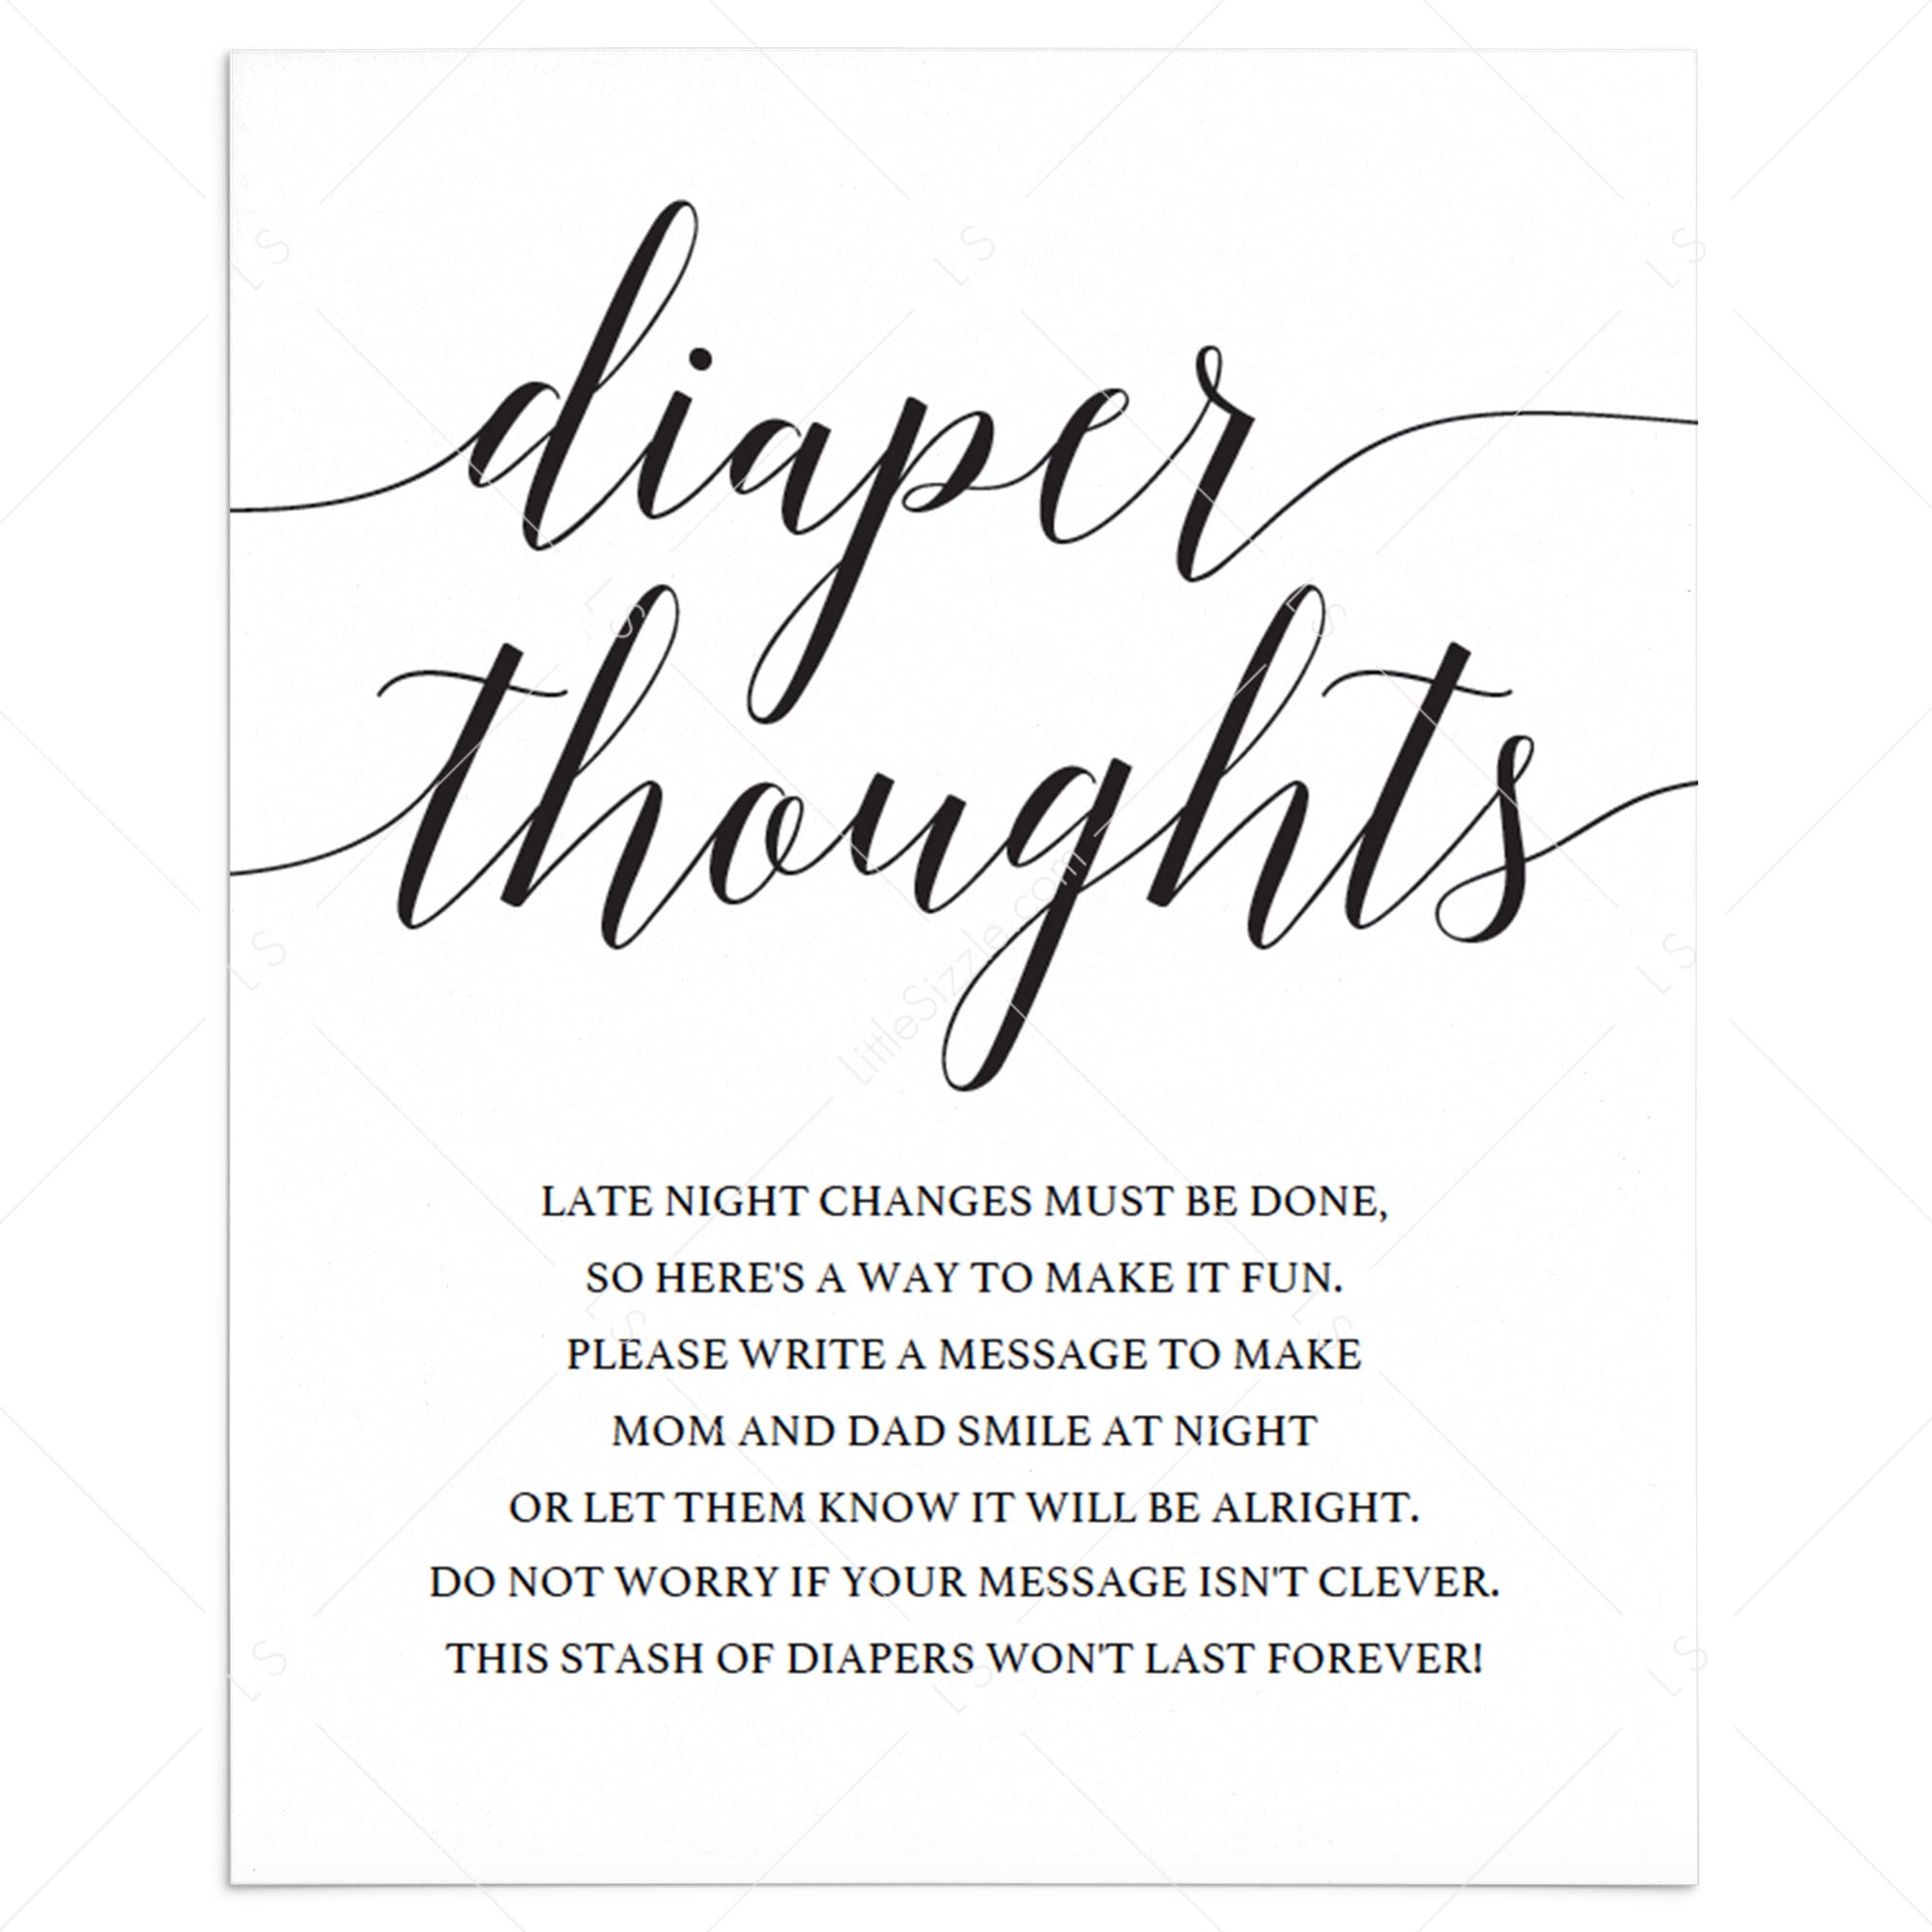 Simple diaper thoughts sign template by LittleSizzle